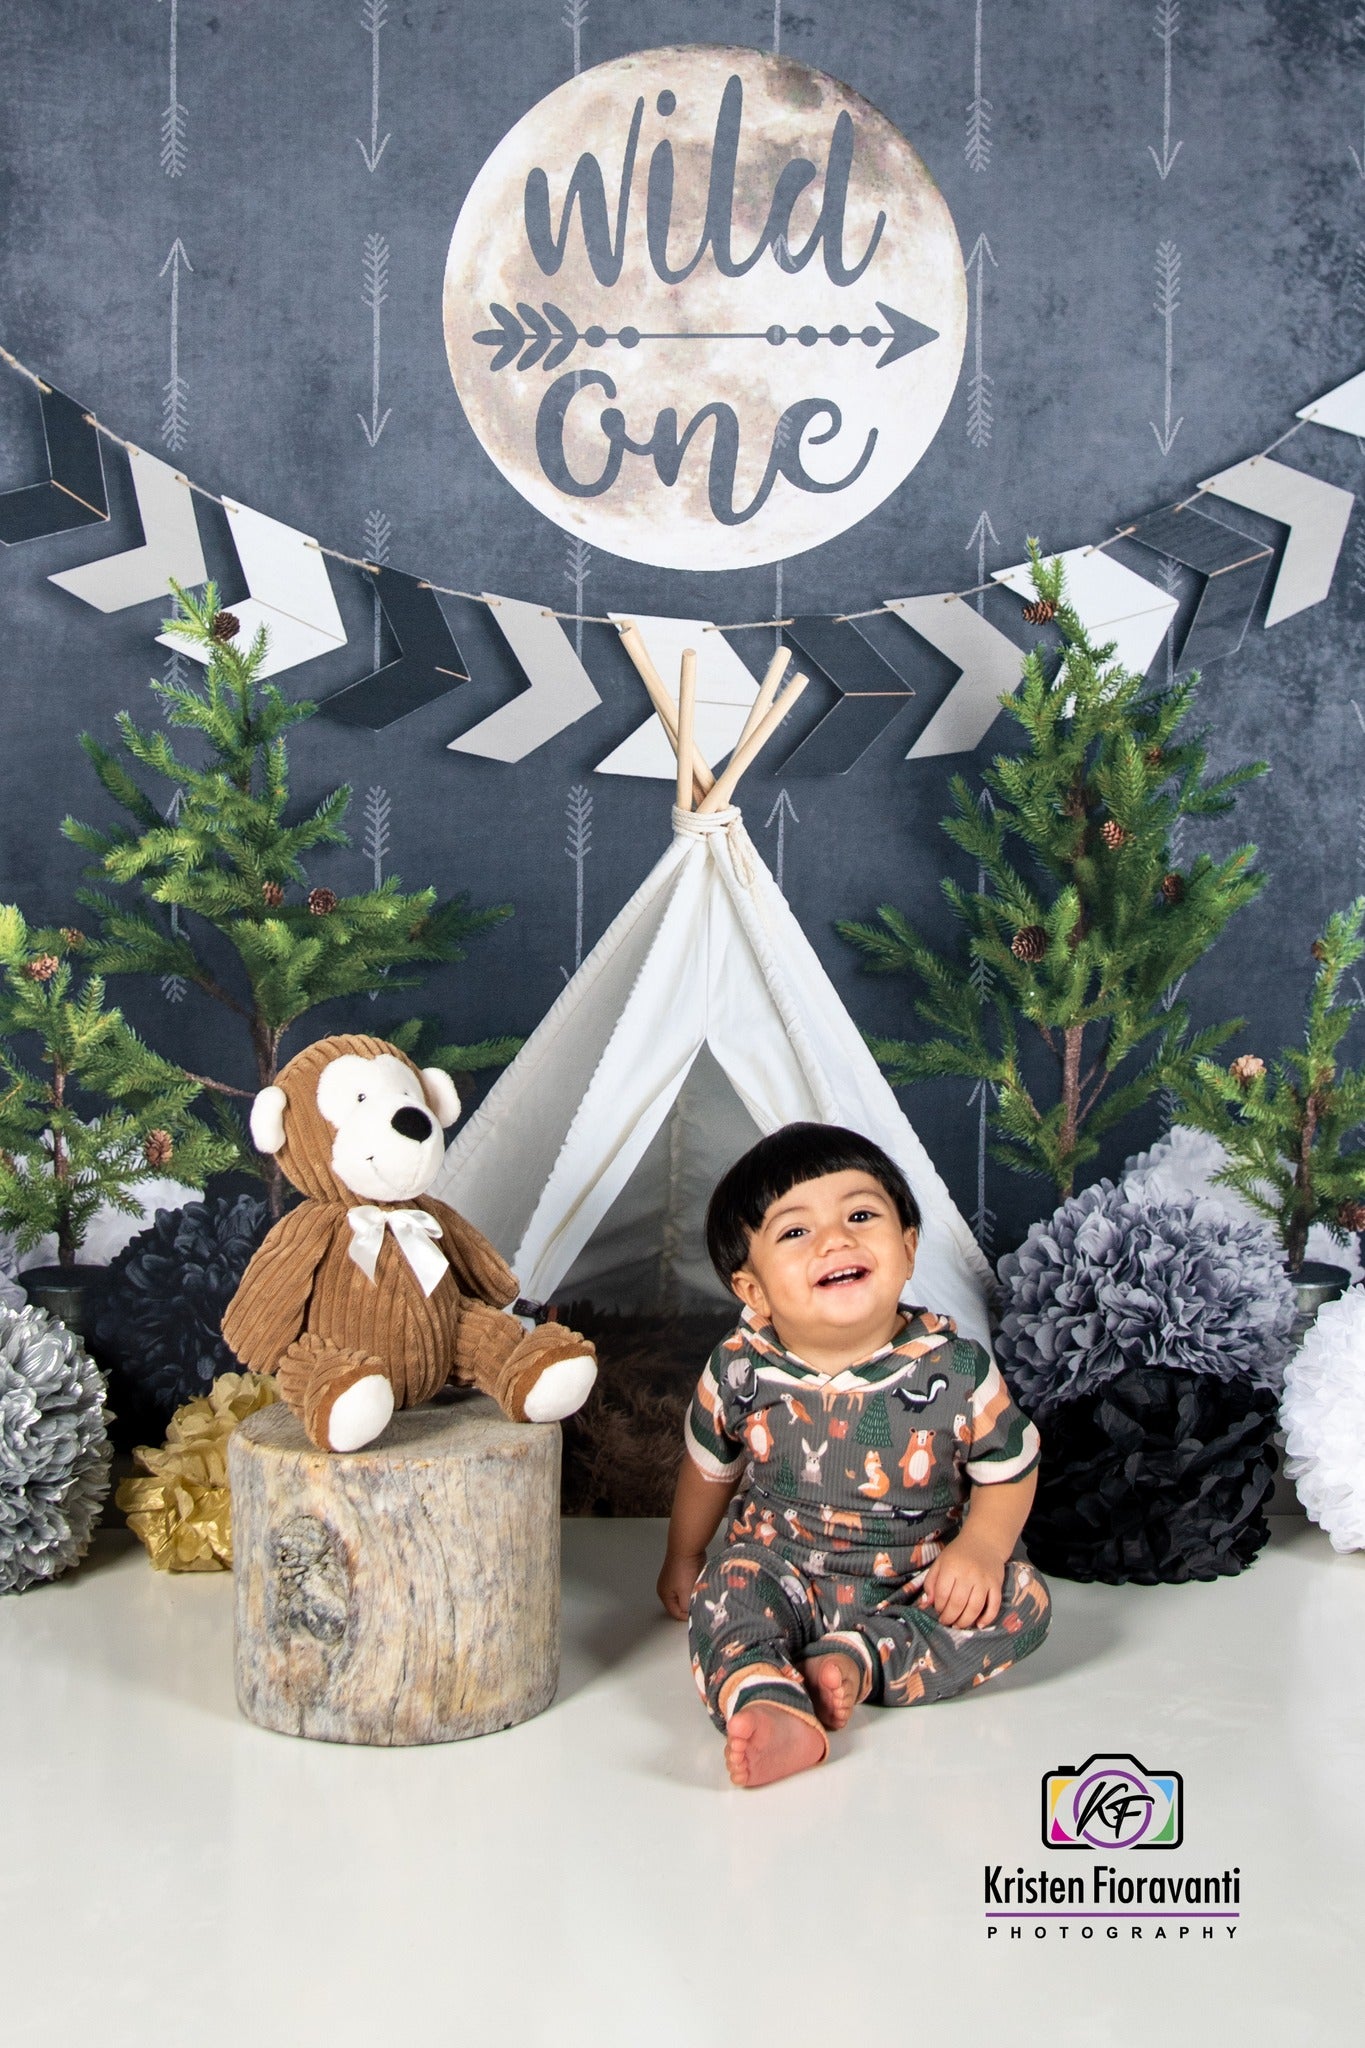 Kate Wild One Boy First Birthday Backdrop Designed By Mandy Ringe Photography